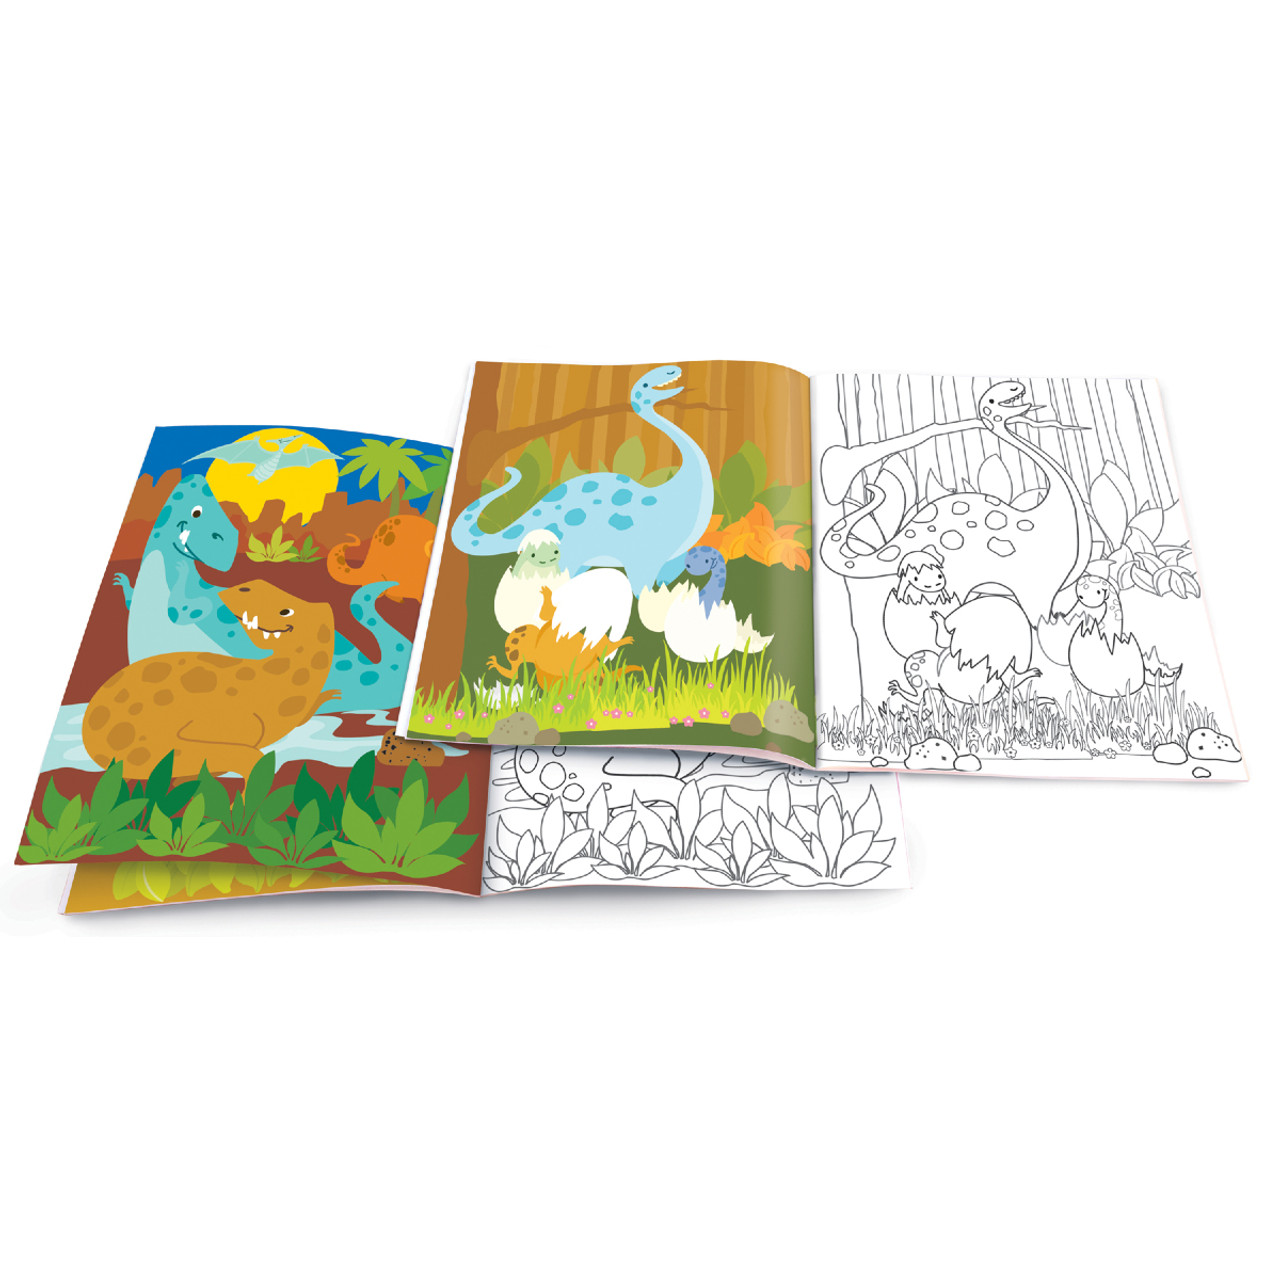 Dry Erase Coloring Book with Reusable Stickers- Animals Around the World -  The Piggy Story